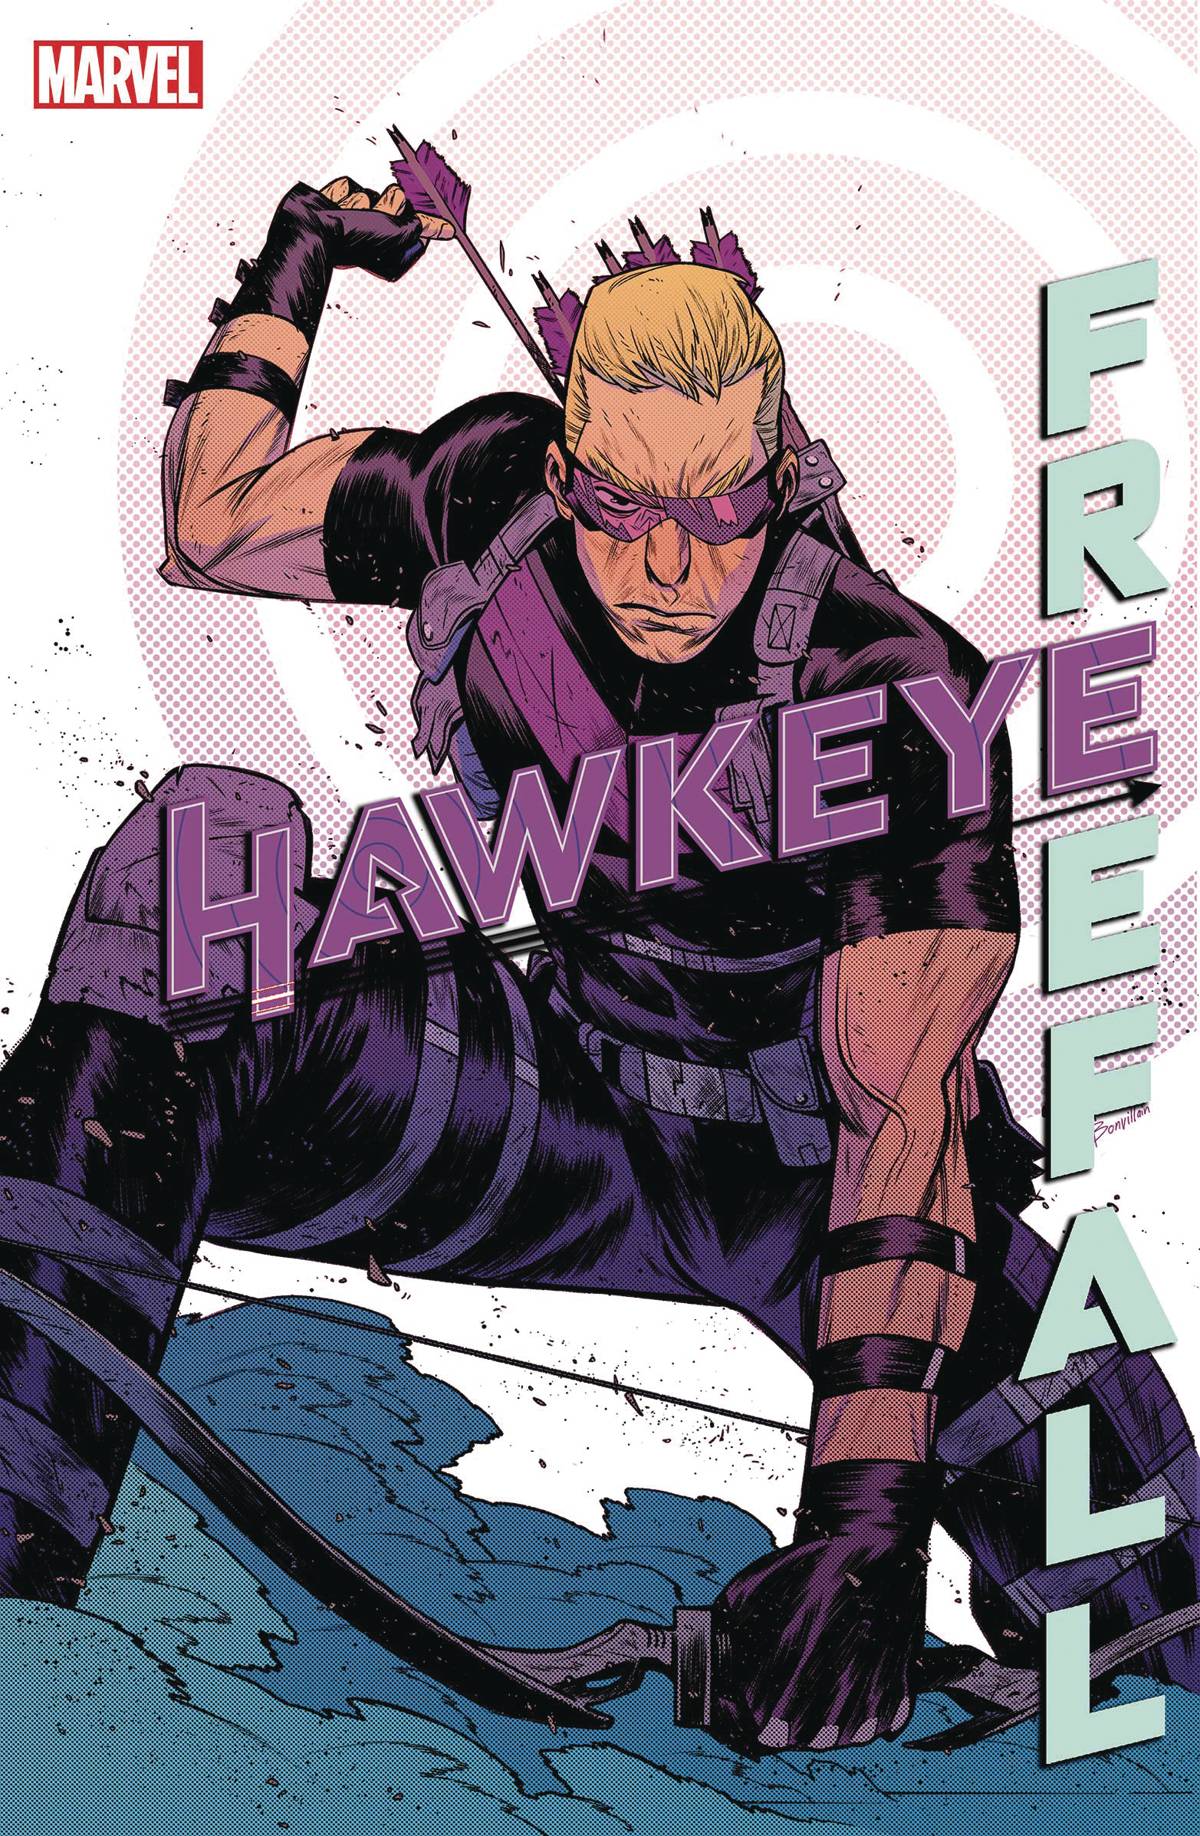 HAWKEYE FREE FALL #5 | Game Master's Emporium (The New GME)